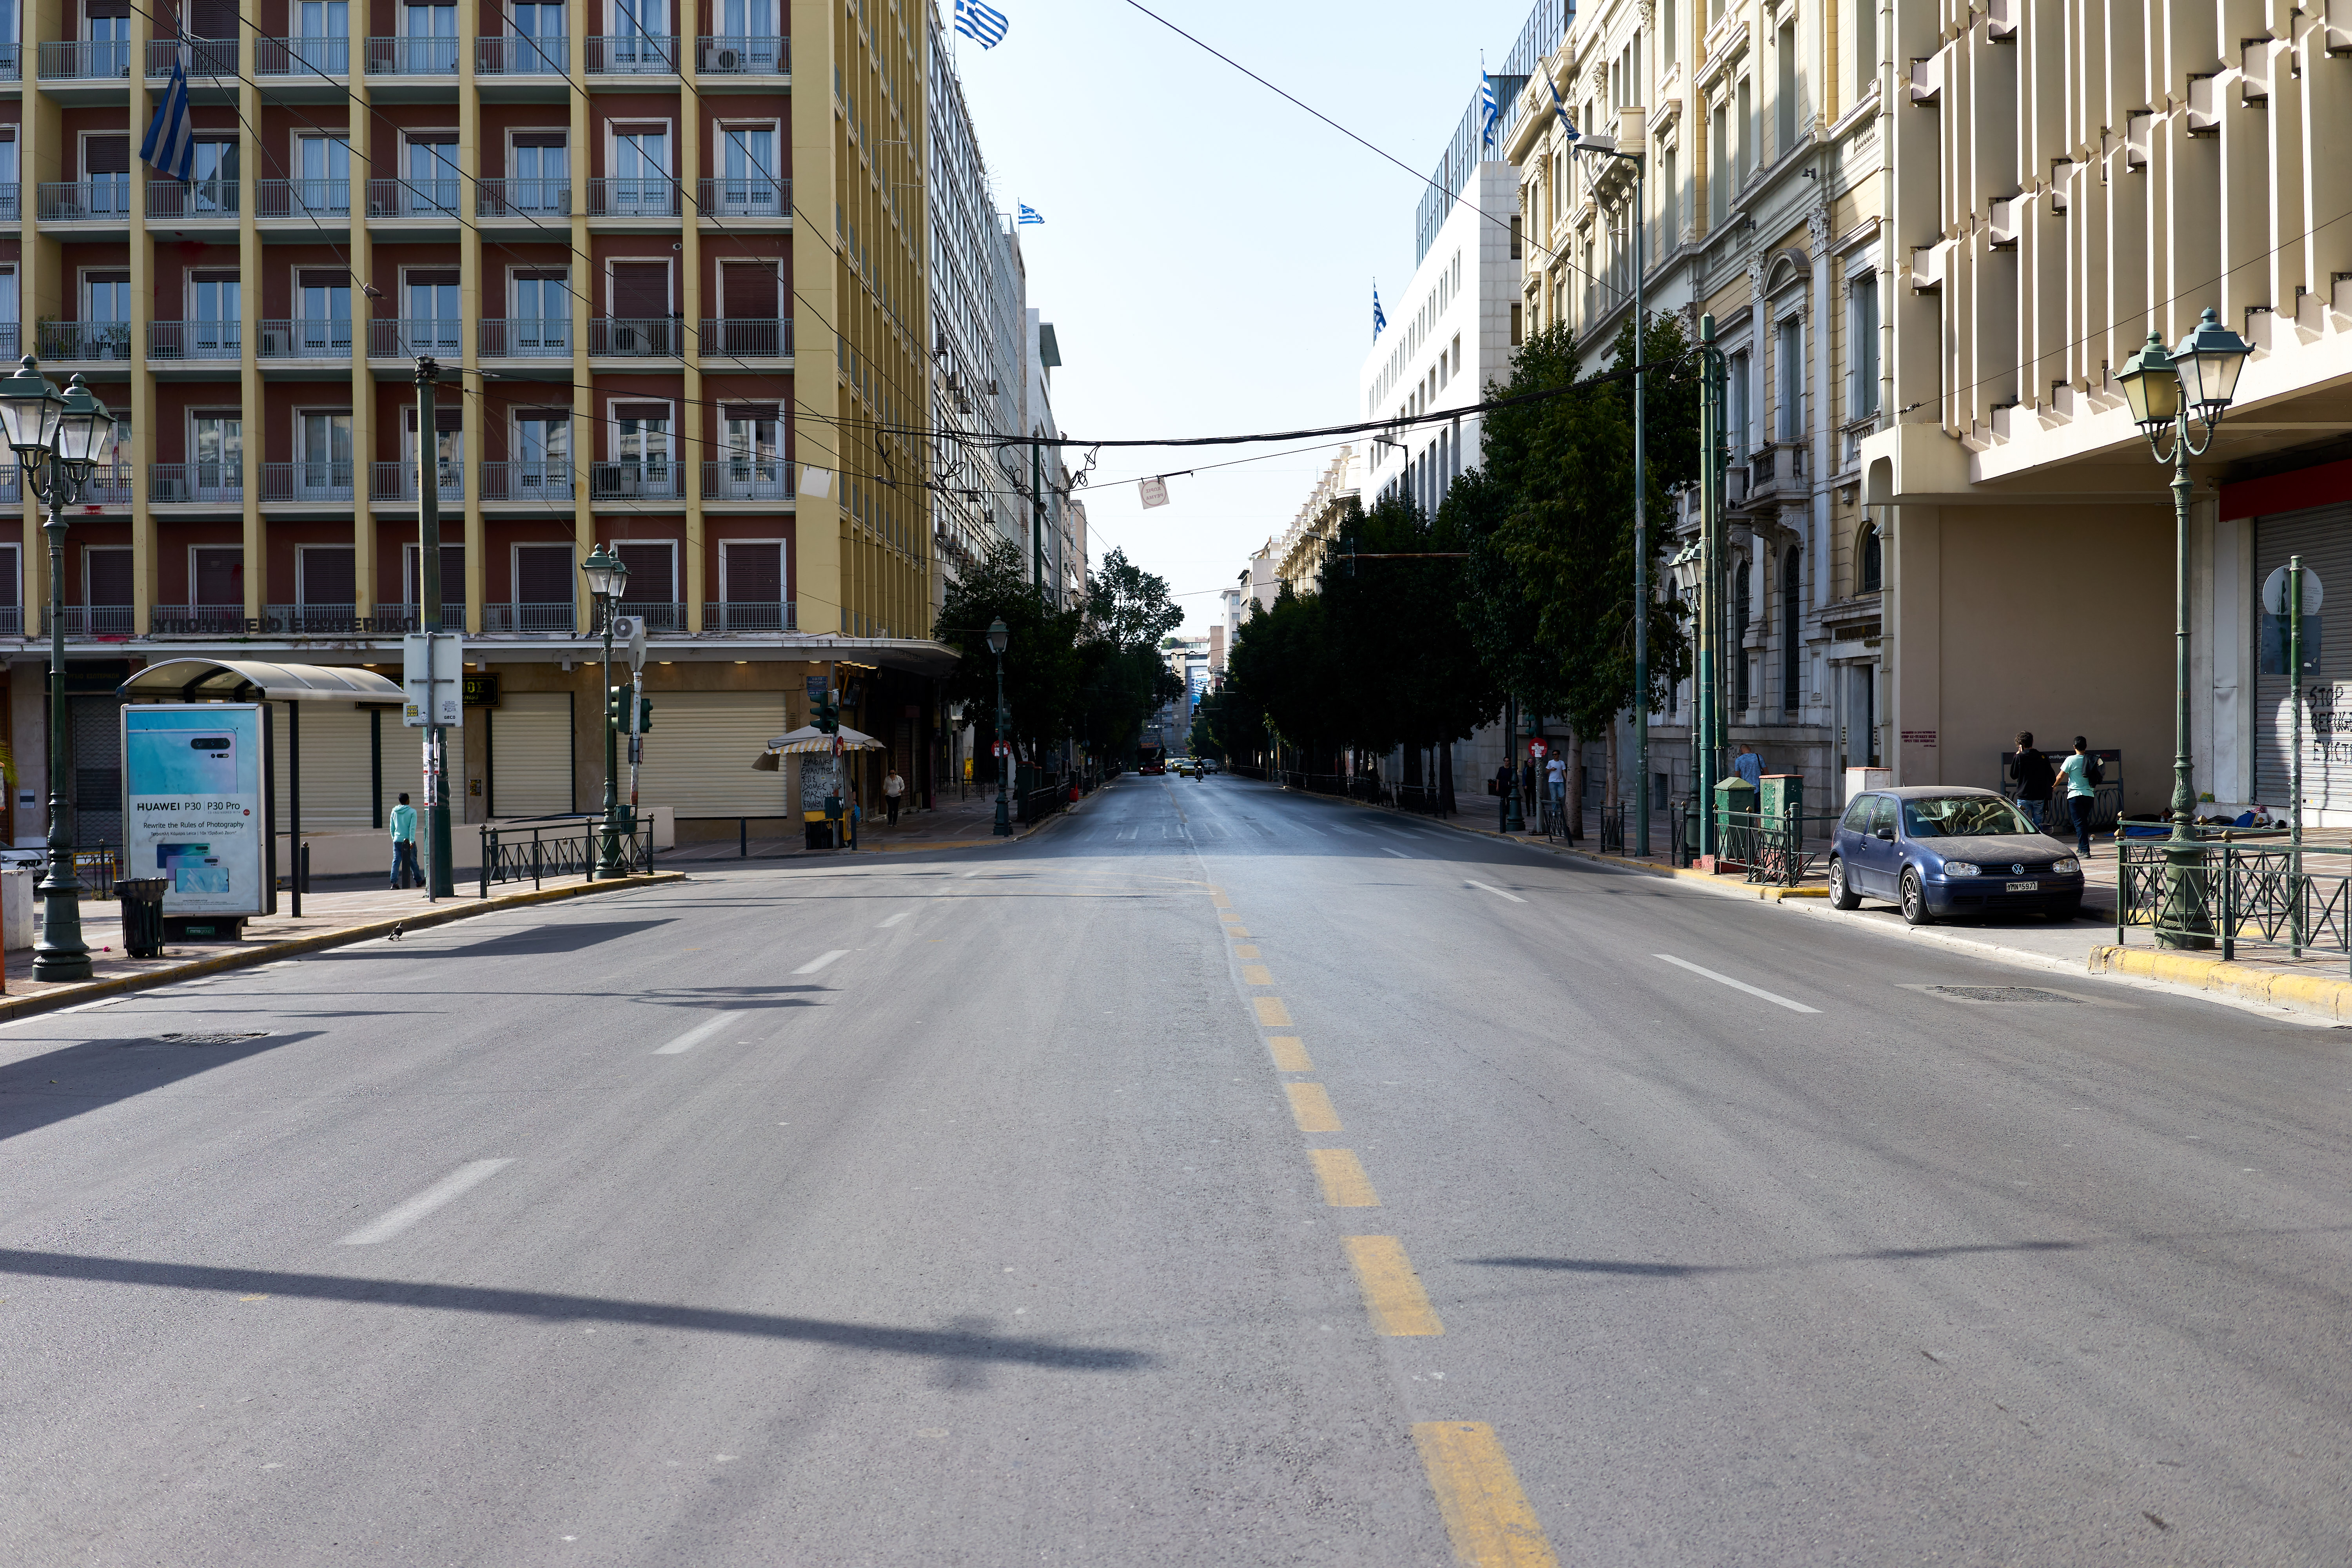 File Stadiou Street In Athens On 28 April 19 Jpg Wikimedia Commons